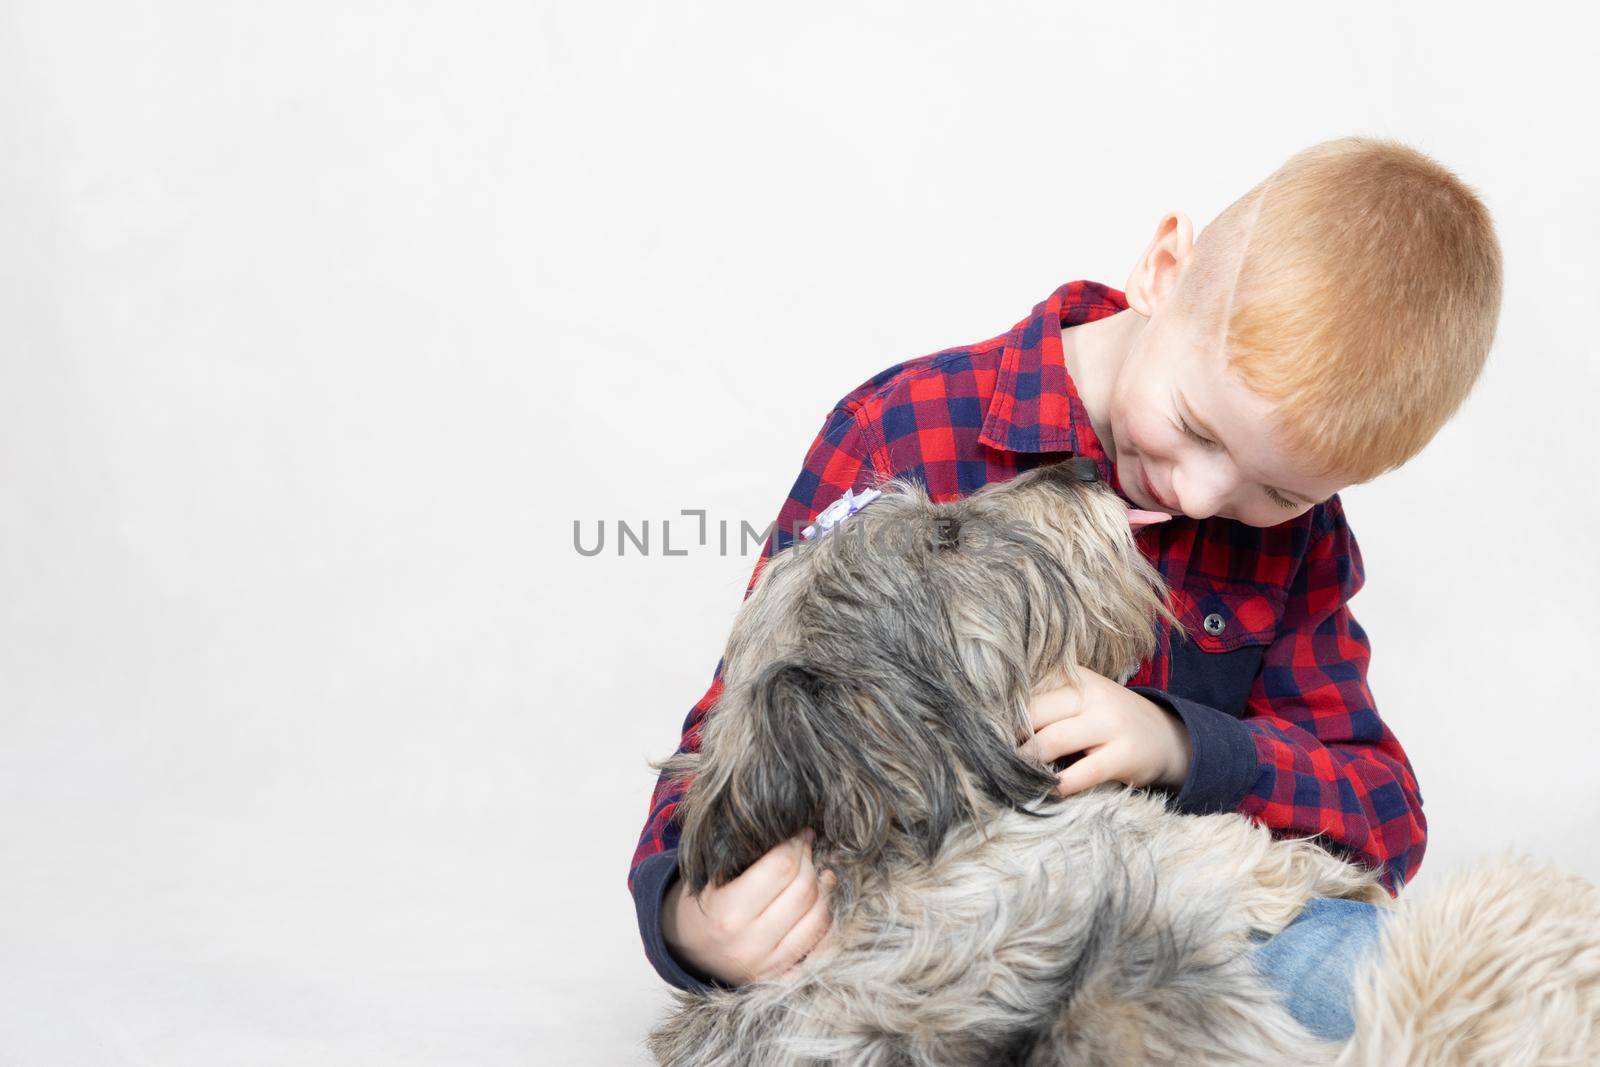 a red-haired boy sits and hugs his favorite shaggy dog and smiles at her. The pet licks the boy's face with its tongue